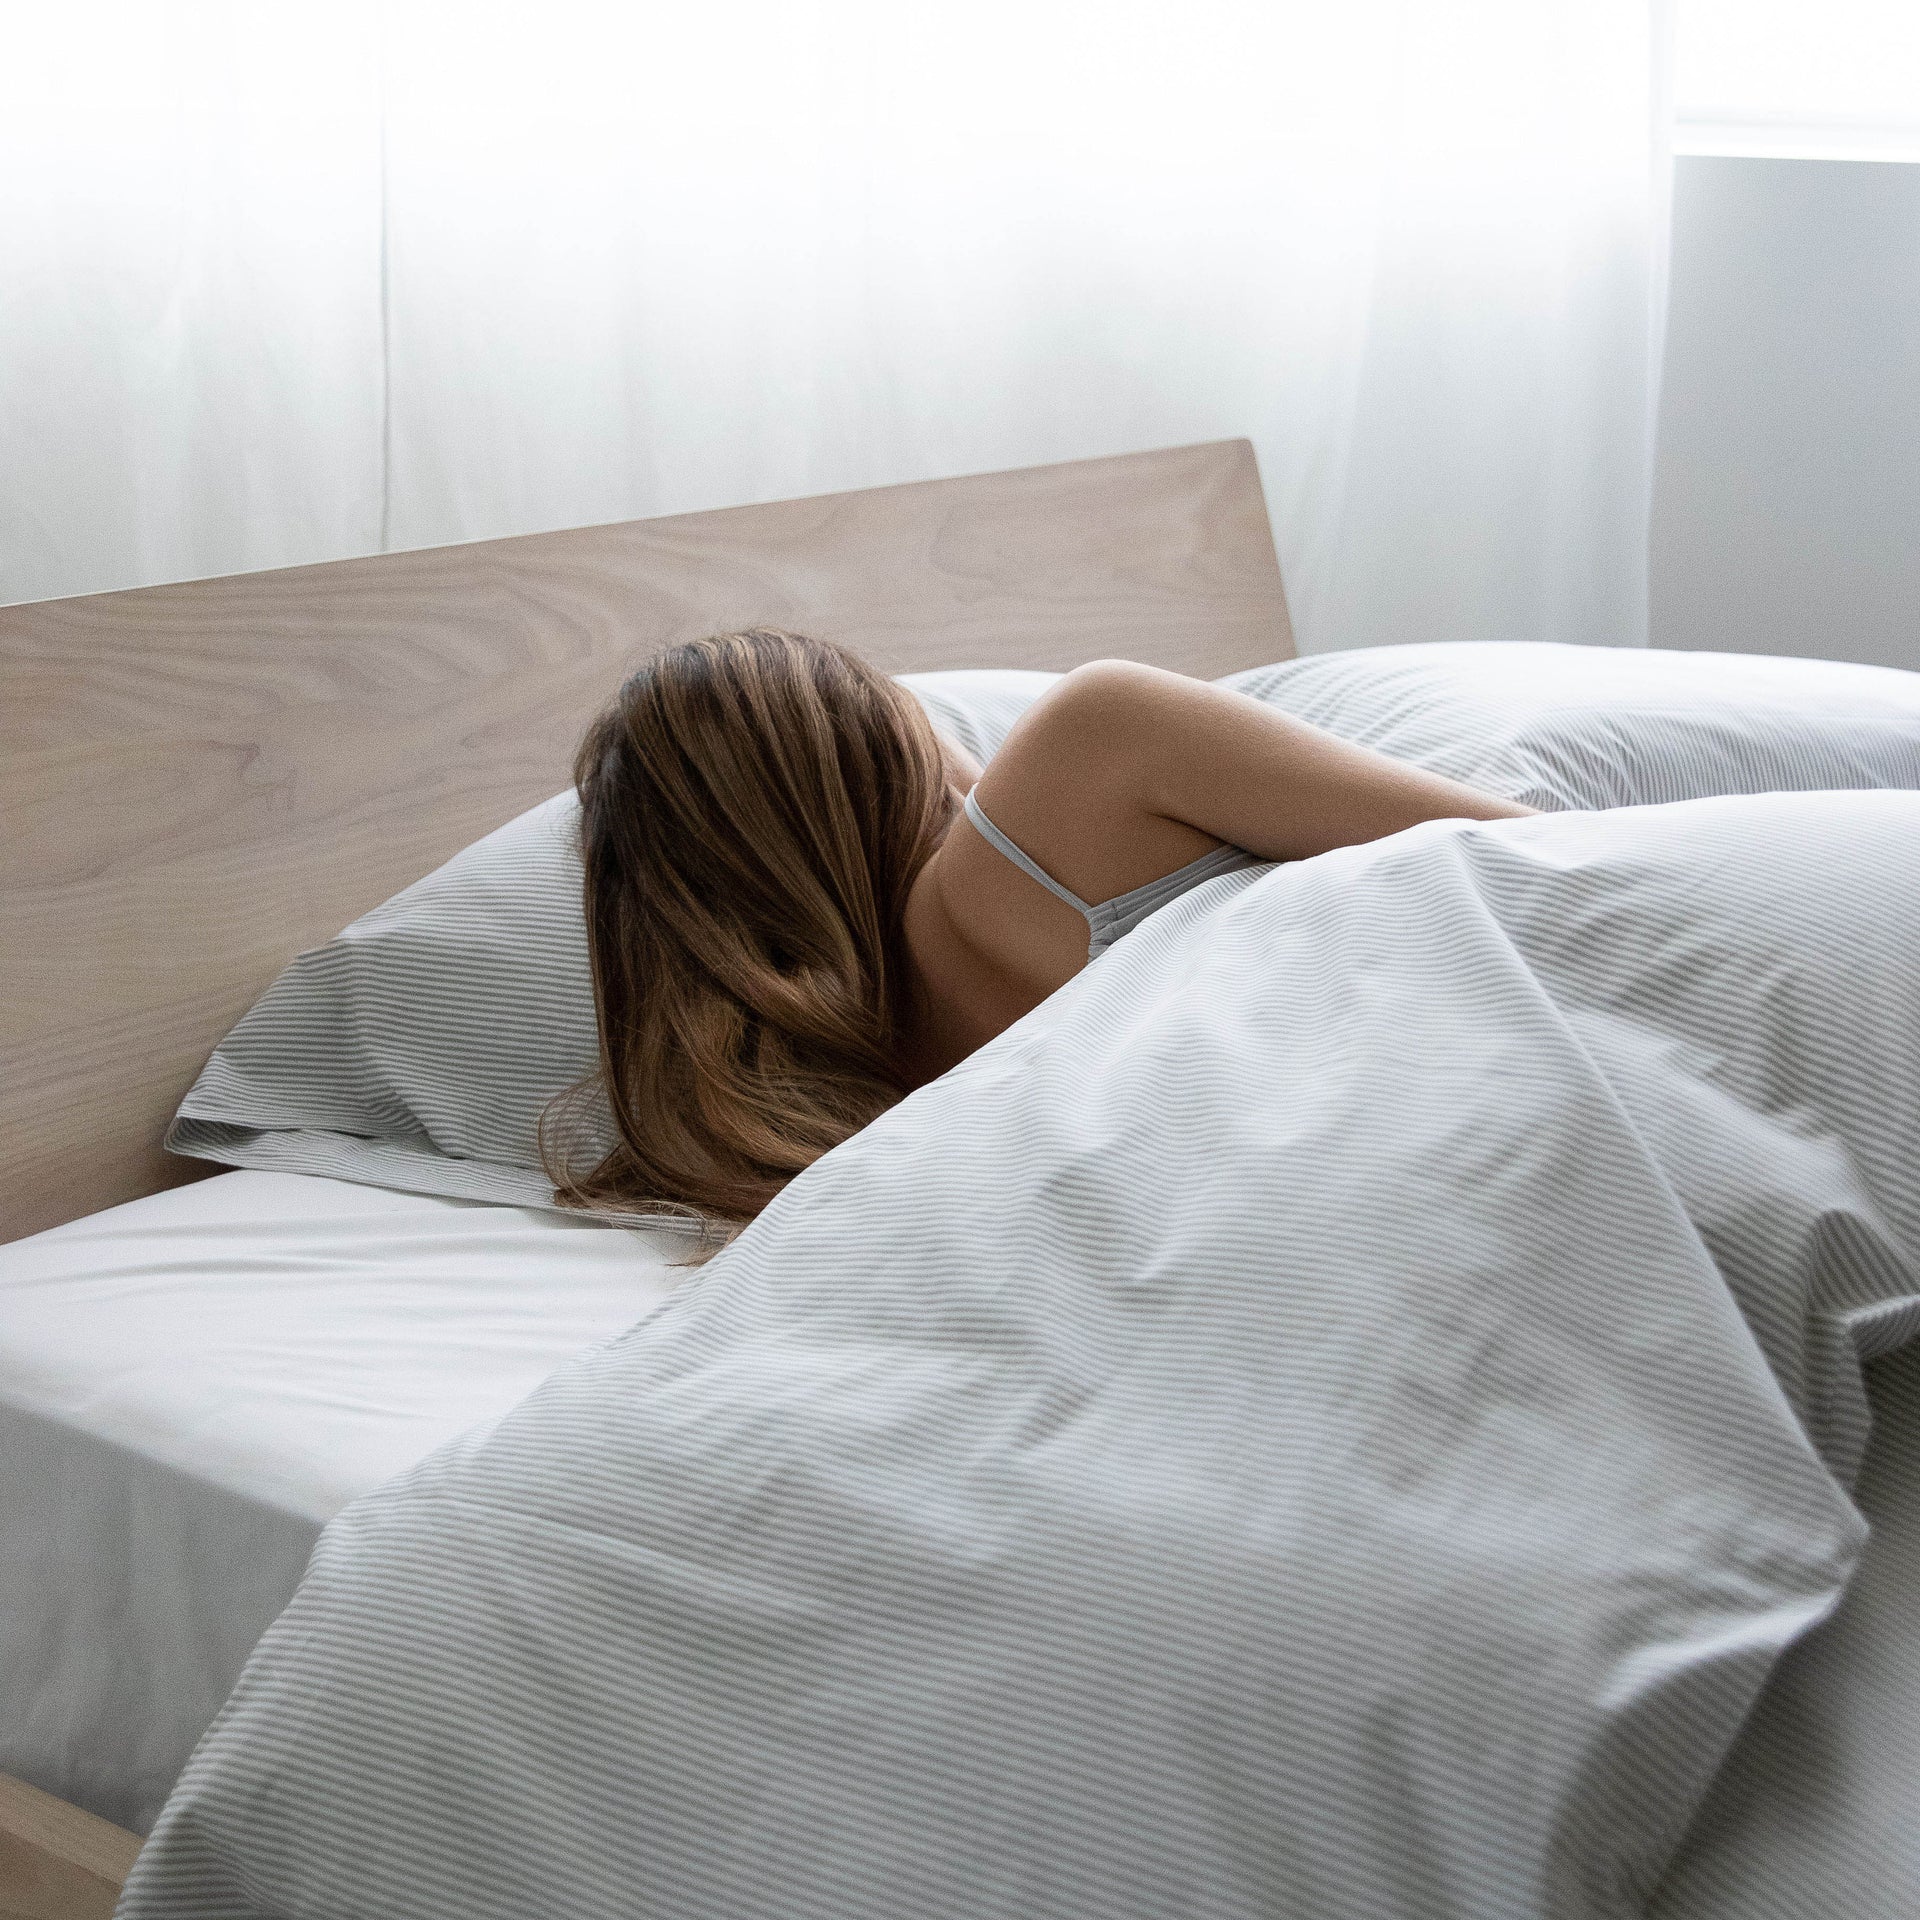 Your Daily Dose: Natural Sleep Aids That Work